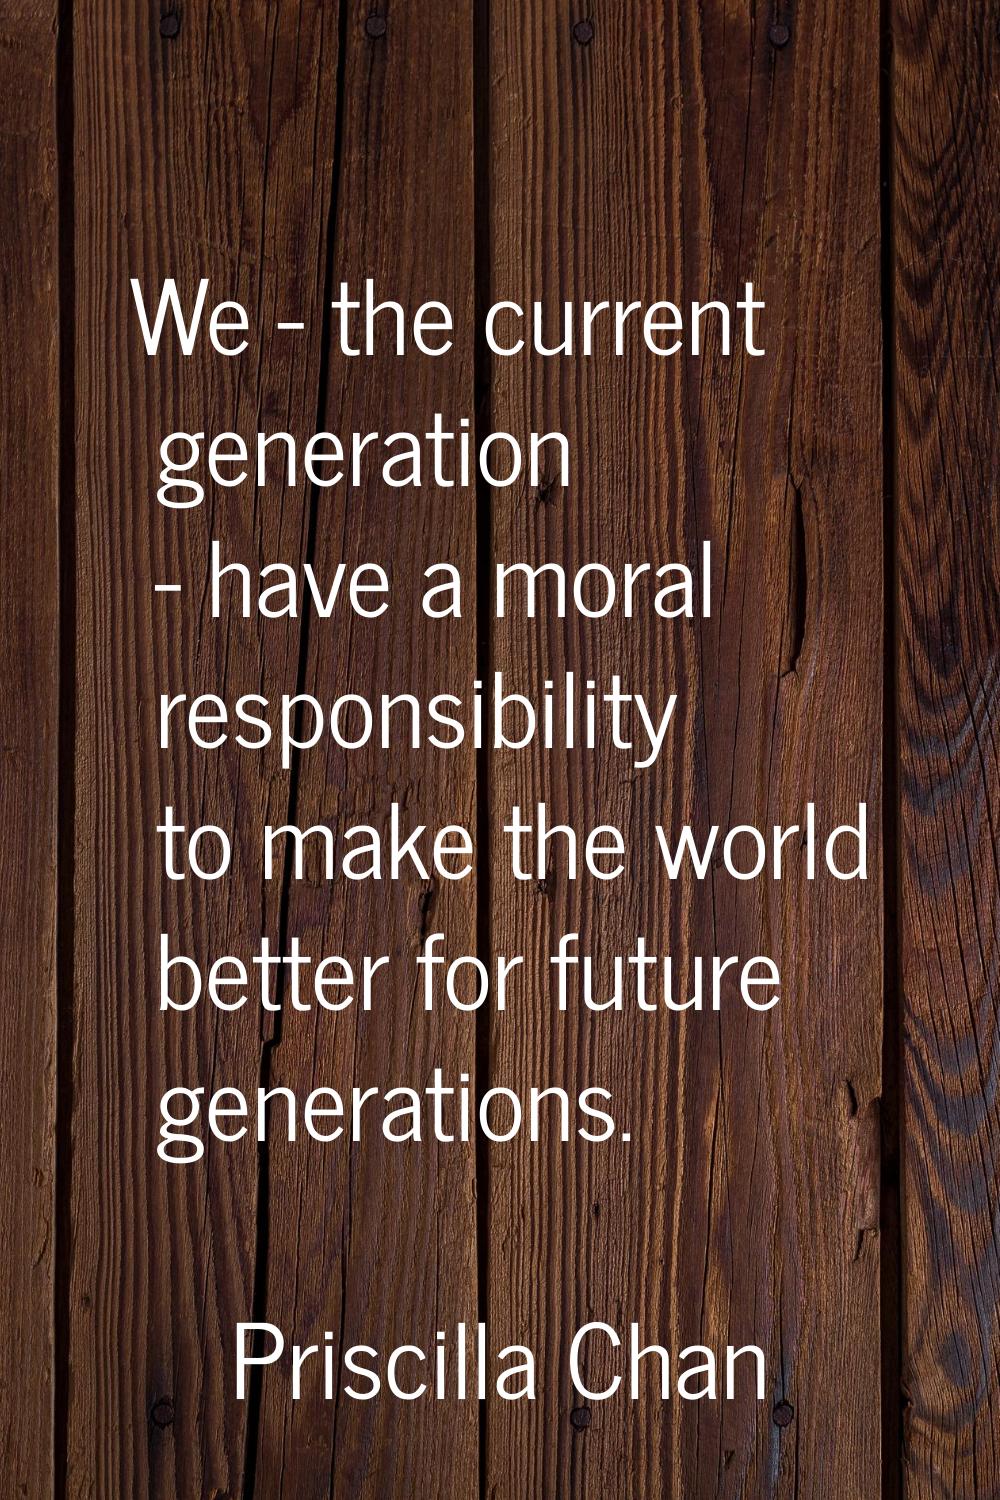 We - the current generation - have a moral responsibility to make the world better for future gener